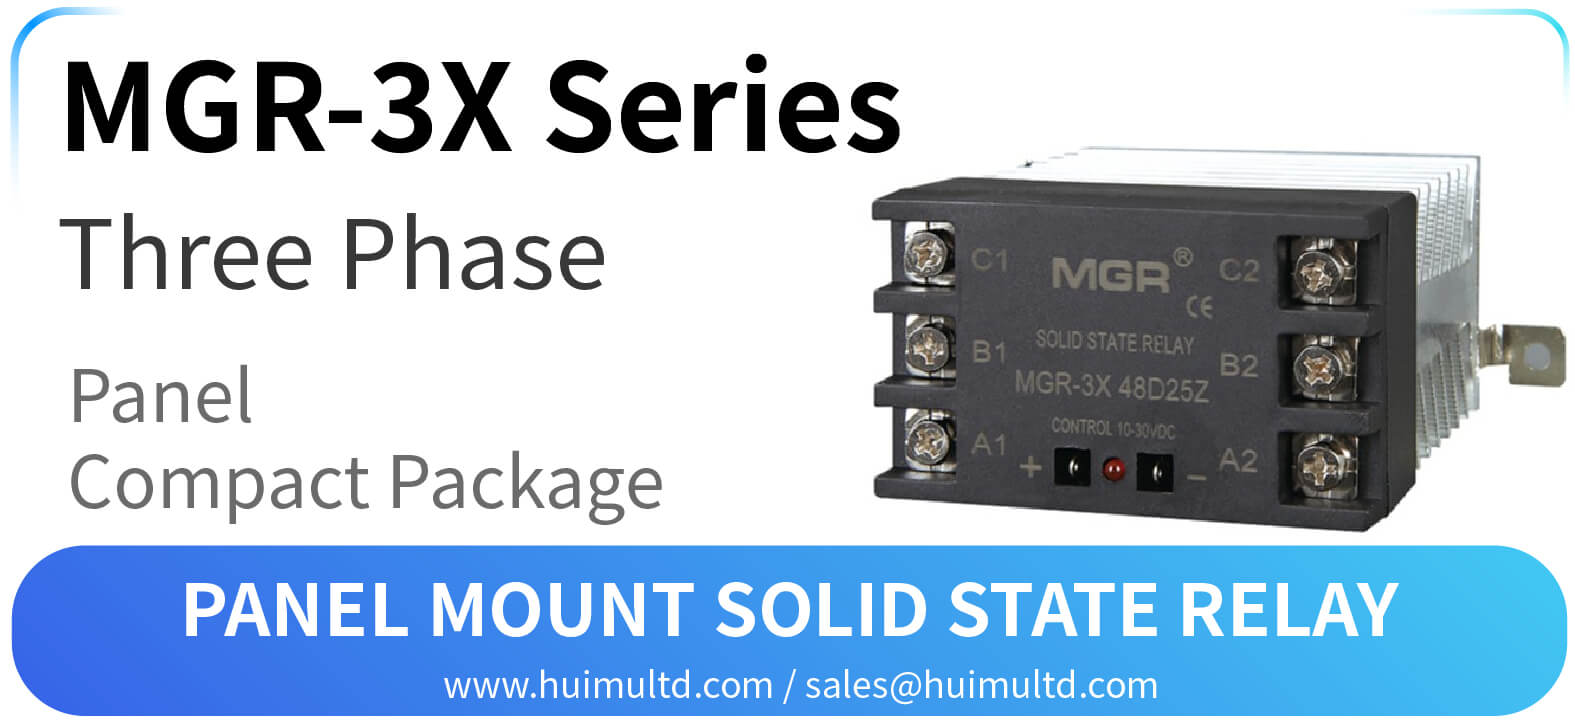 MGR-3X Series Panel Mount Solid State Relay